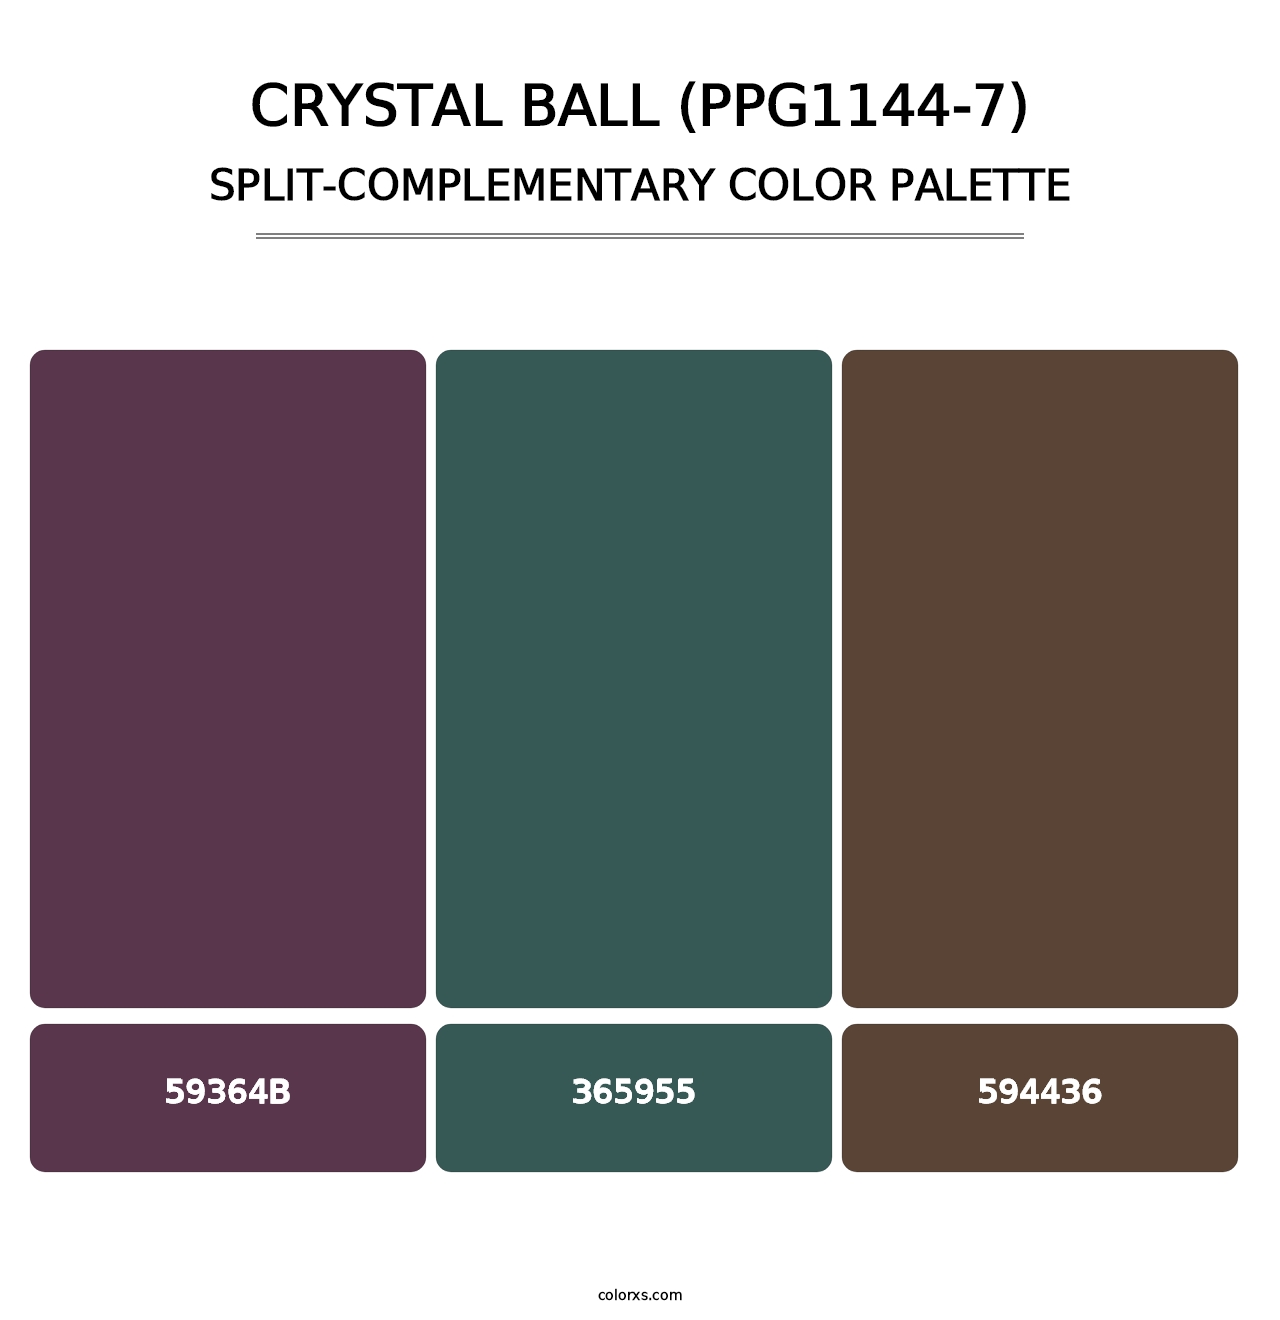 Crystal Ball (PPG1144-7) - Split-Complementary Color Palette